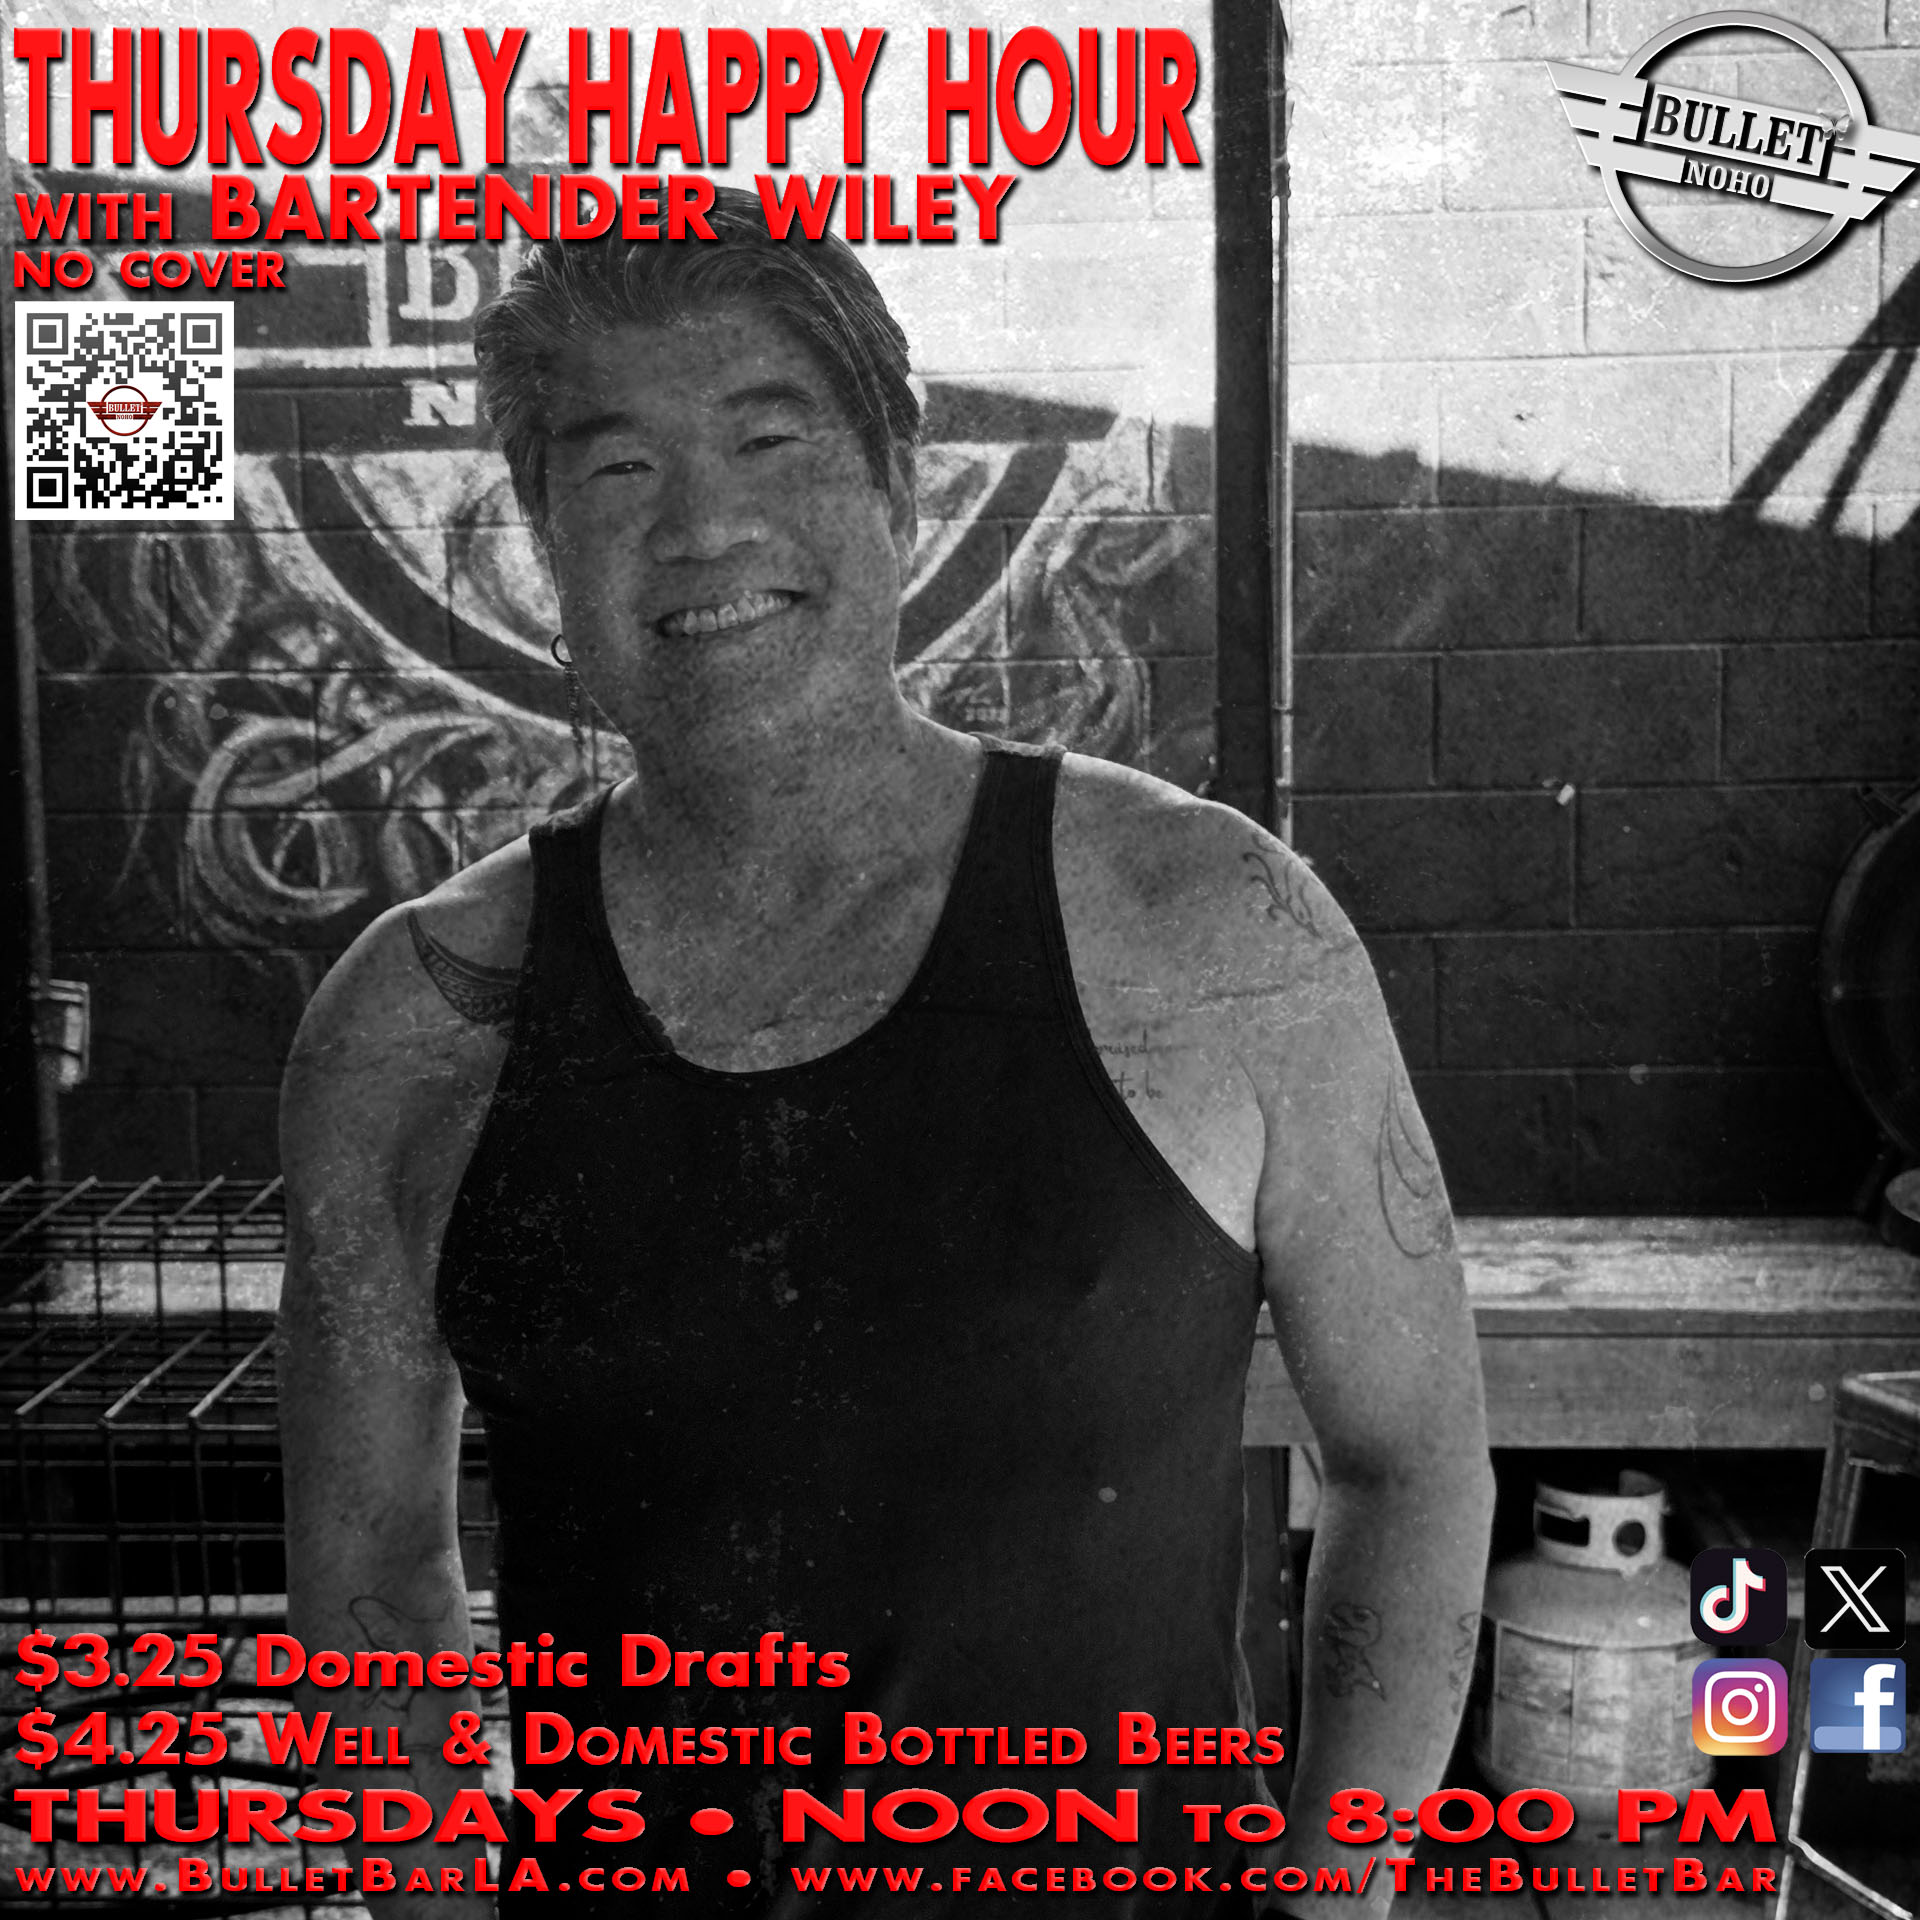 The Bullet Bar: Happy Hour with WILEY! All Well Drinks and Domestic Bottled Beers $4.25, Domestic Drafts $3.25. Thursdays, Noon to 8:00 PM.